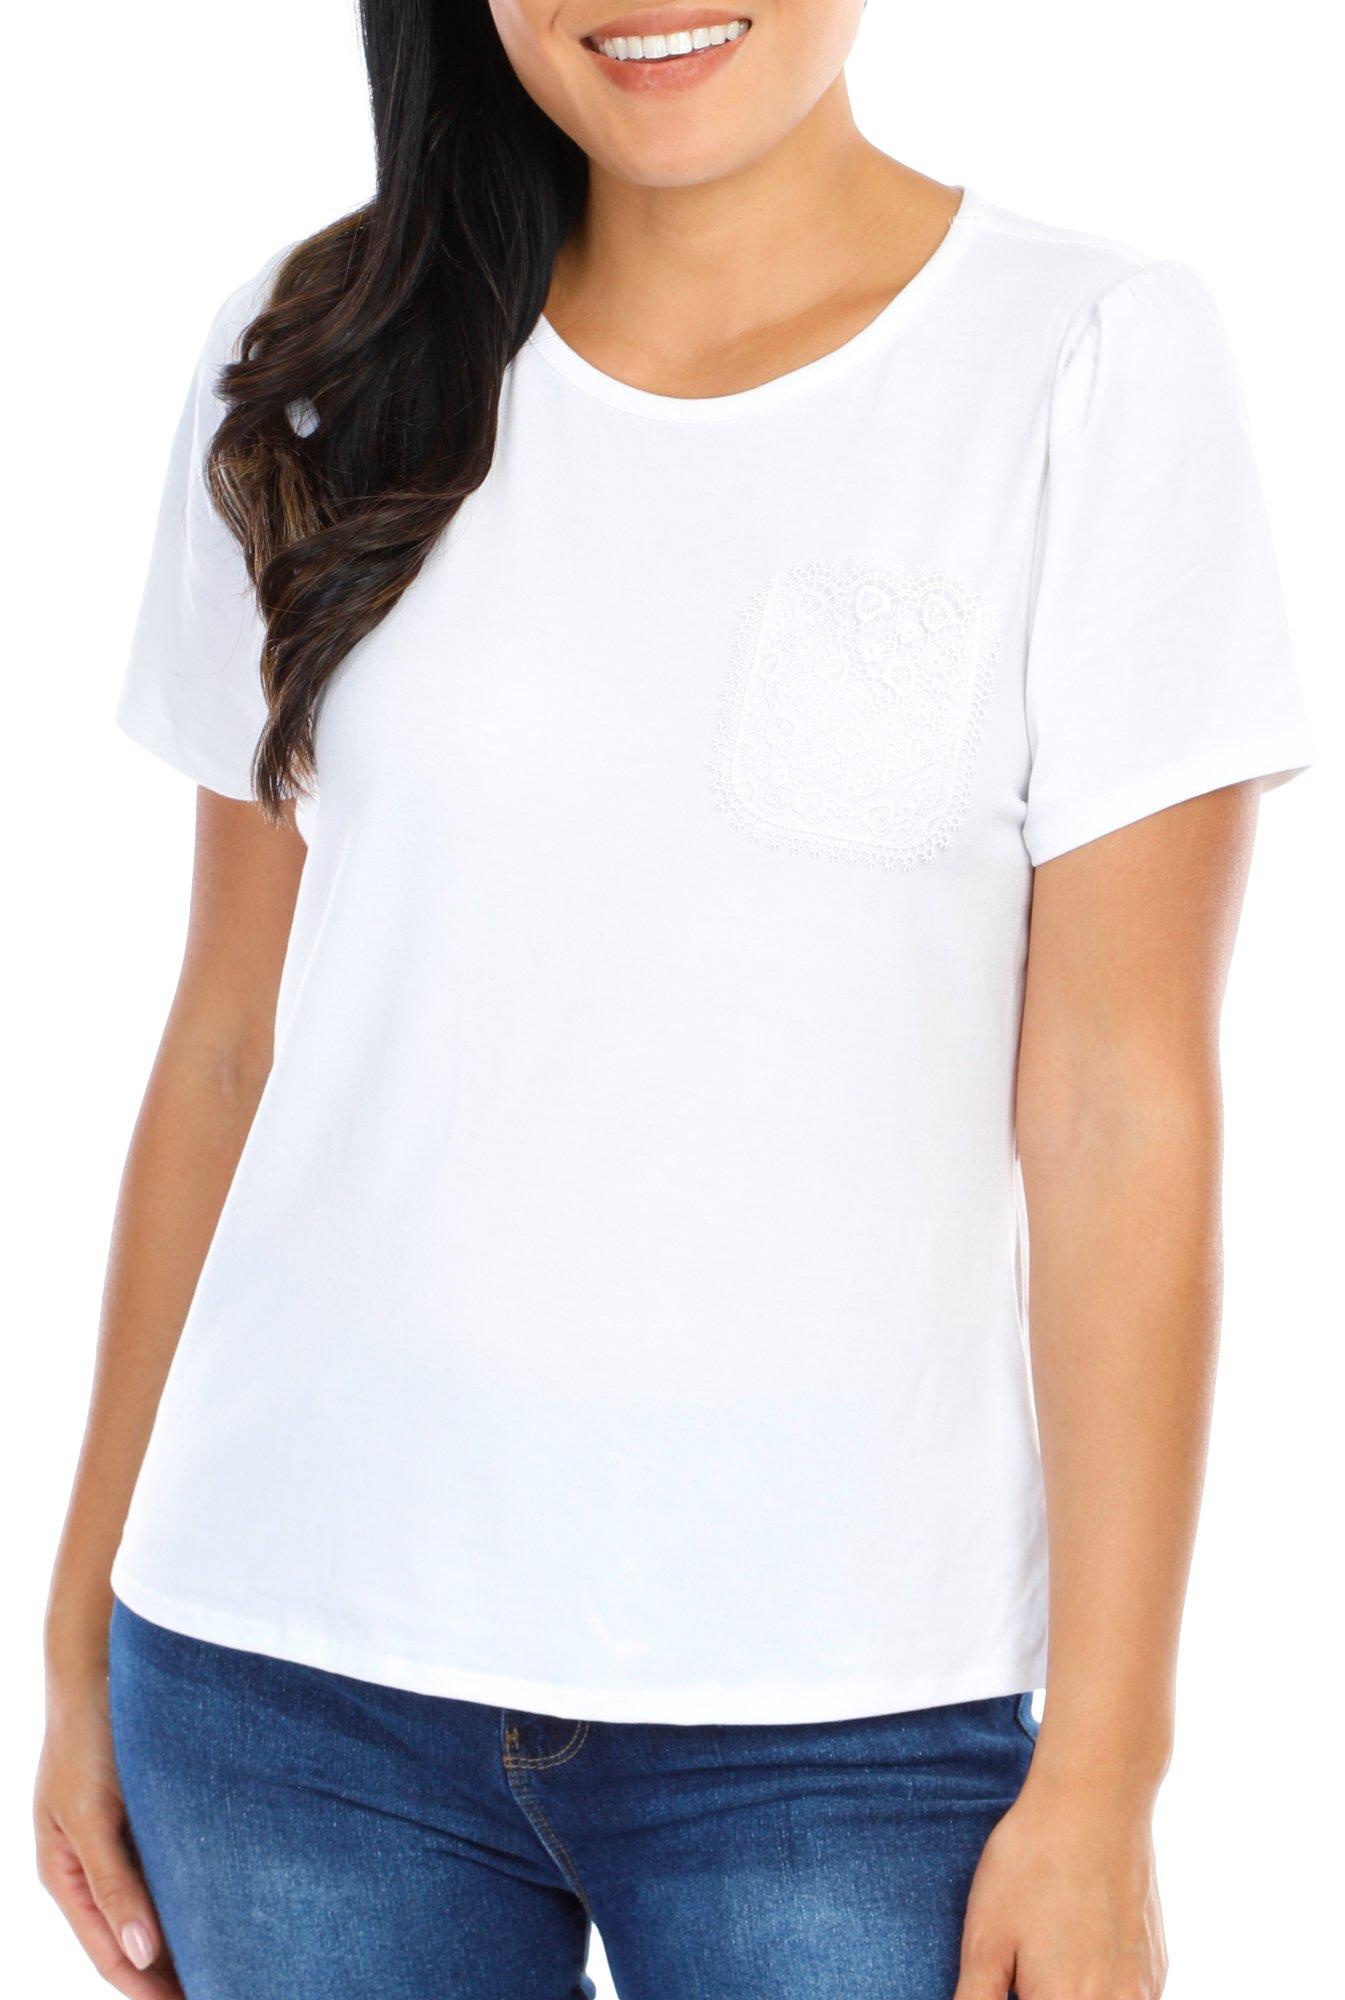 Women's solid Lace Pocket Top